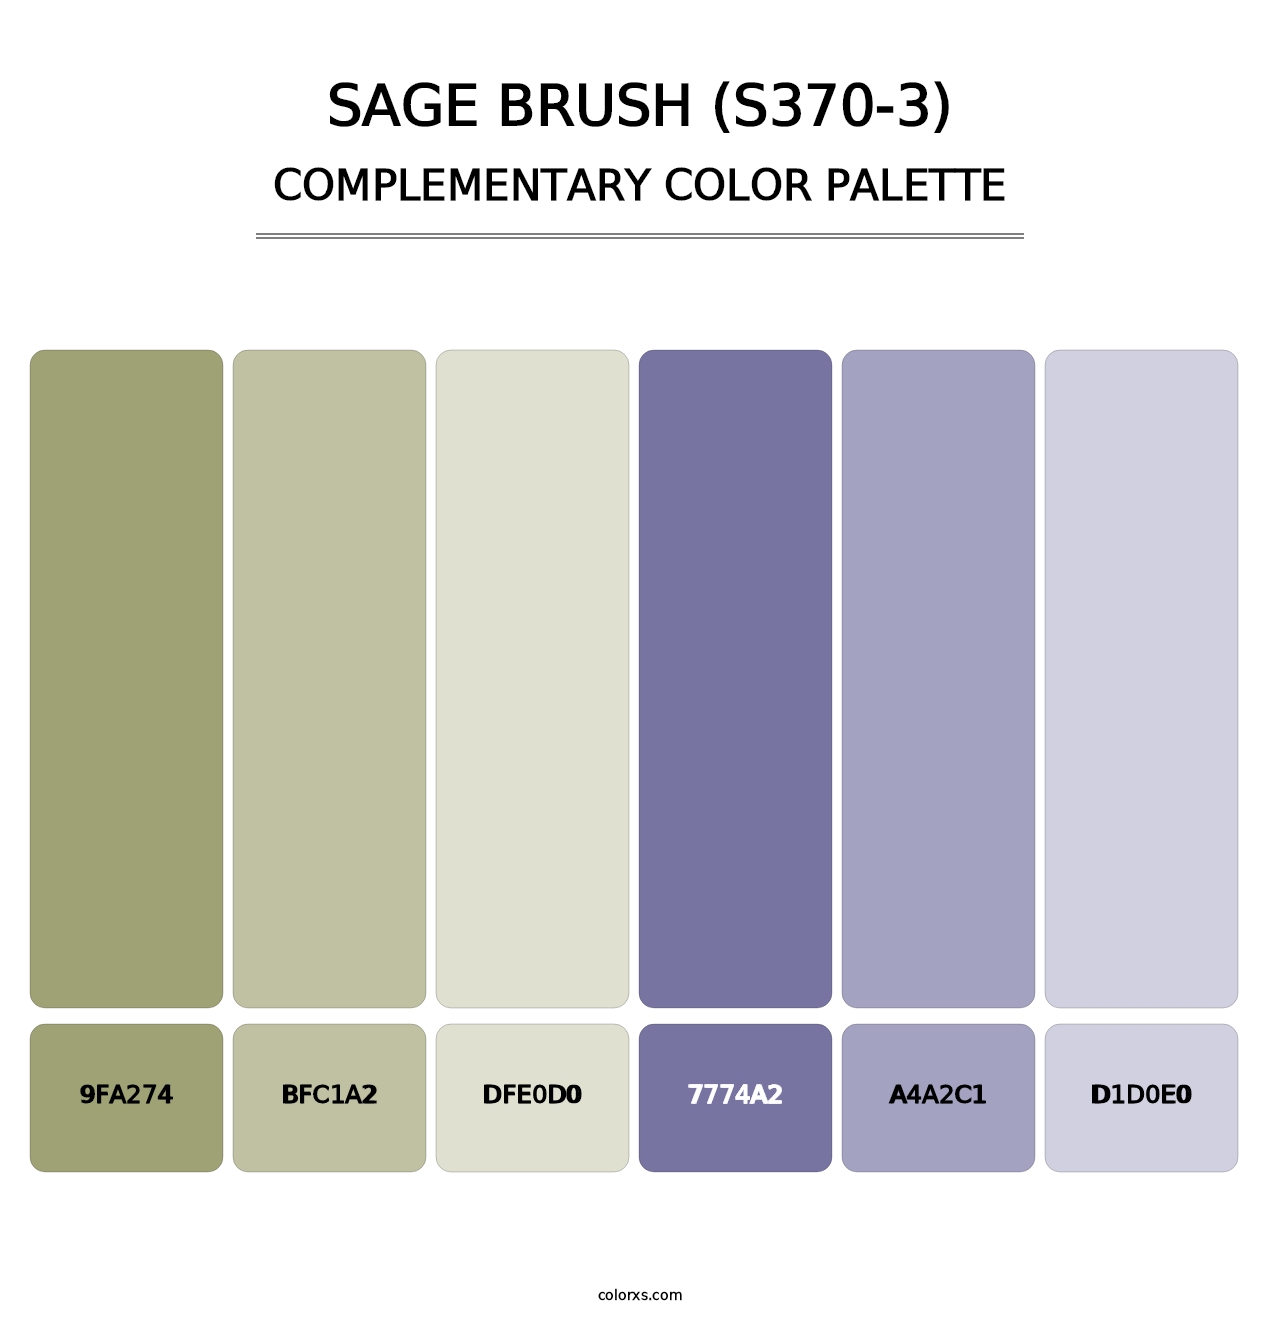 Sage Brush (S370-3) - Complementary Color Palette